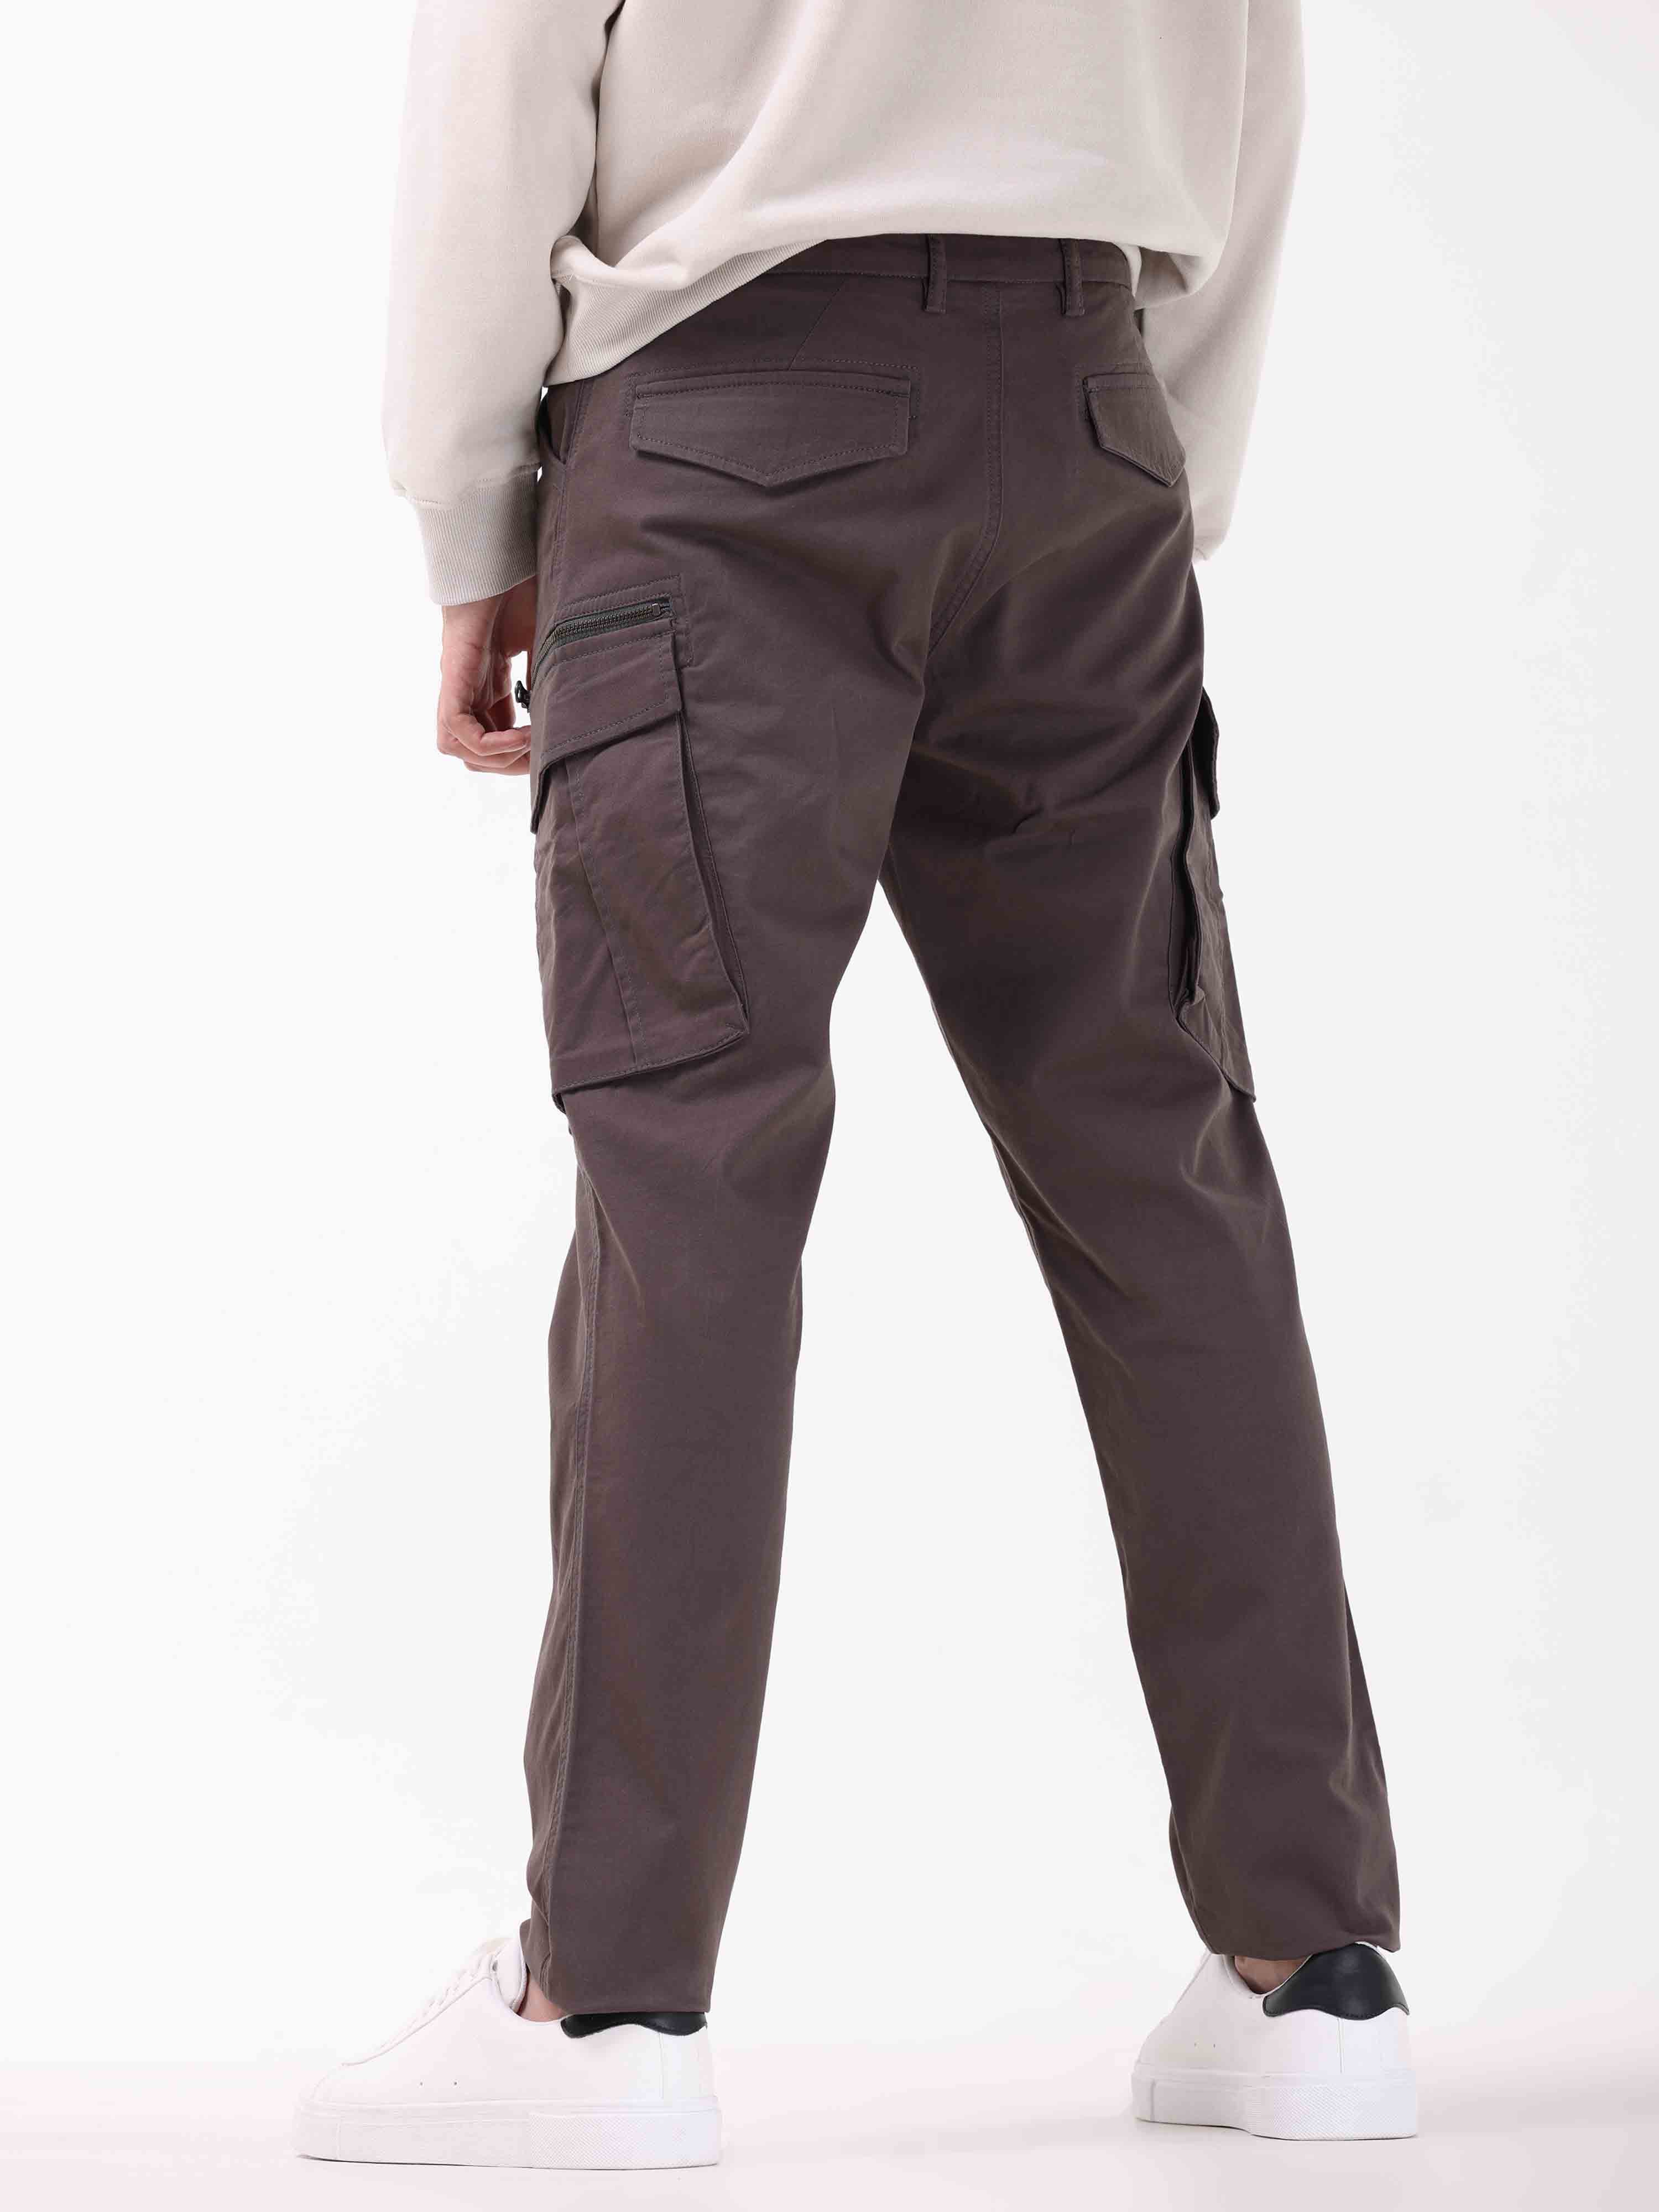 Cargo Pants Wholesale Suppliers In Bangalore India | International Society  of Precision Agriculture